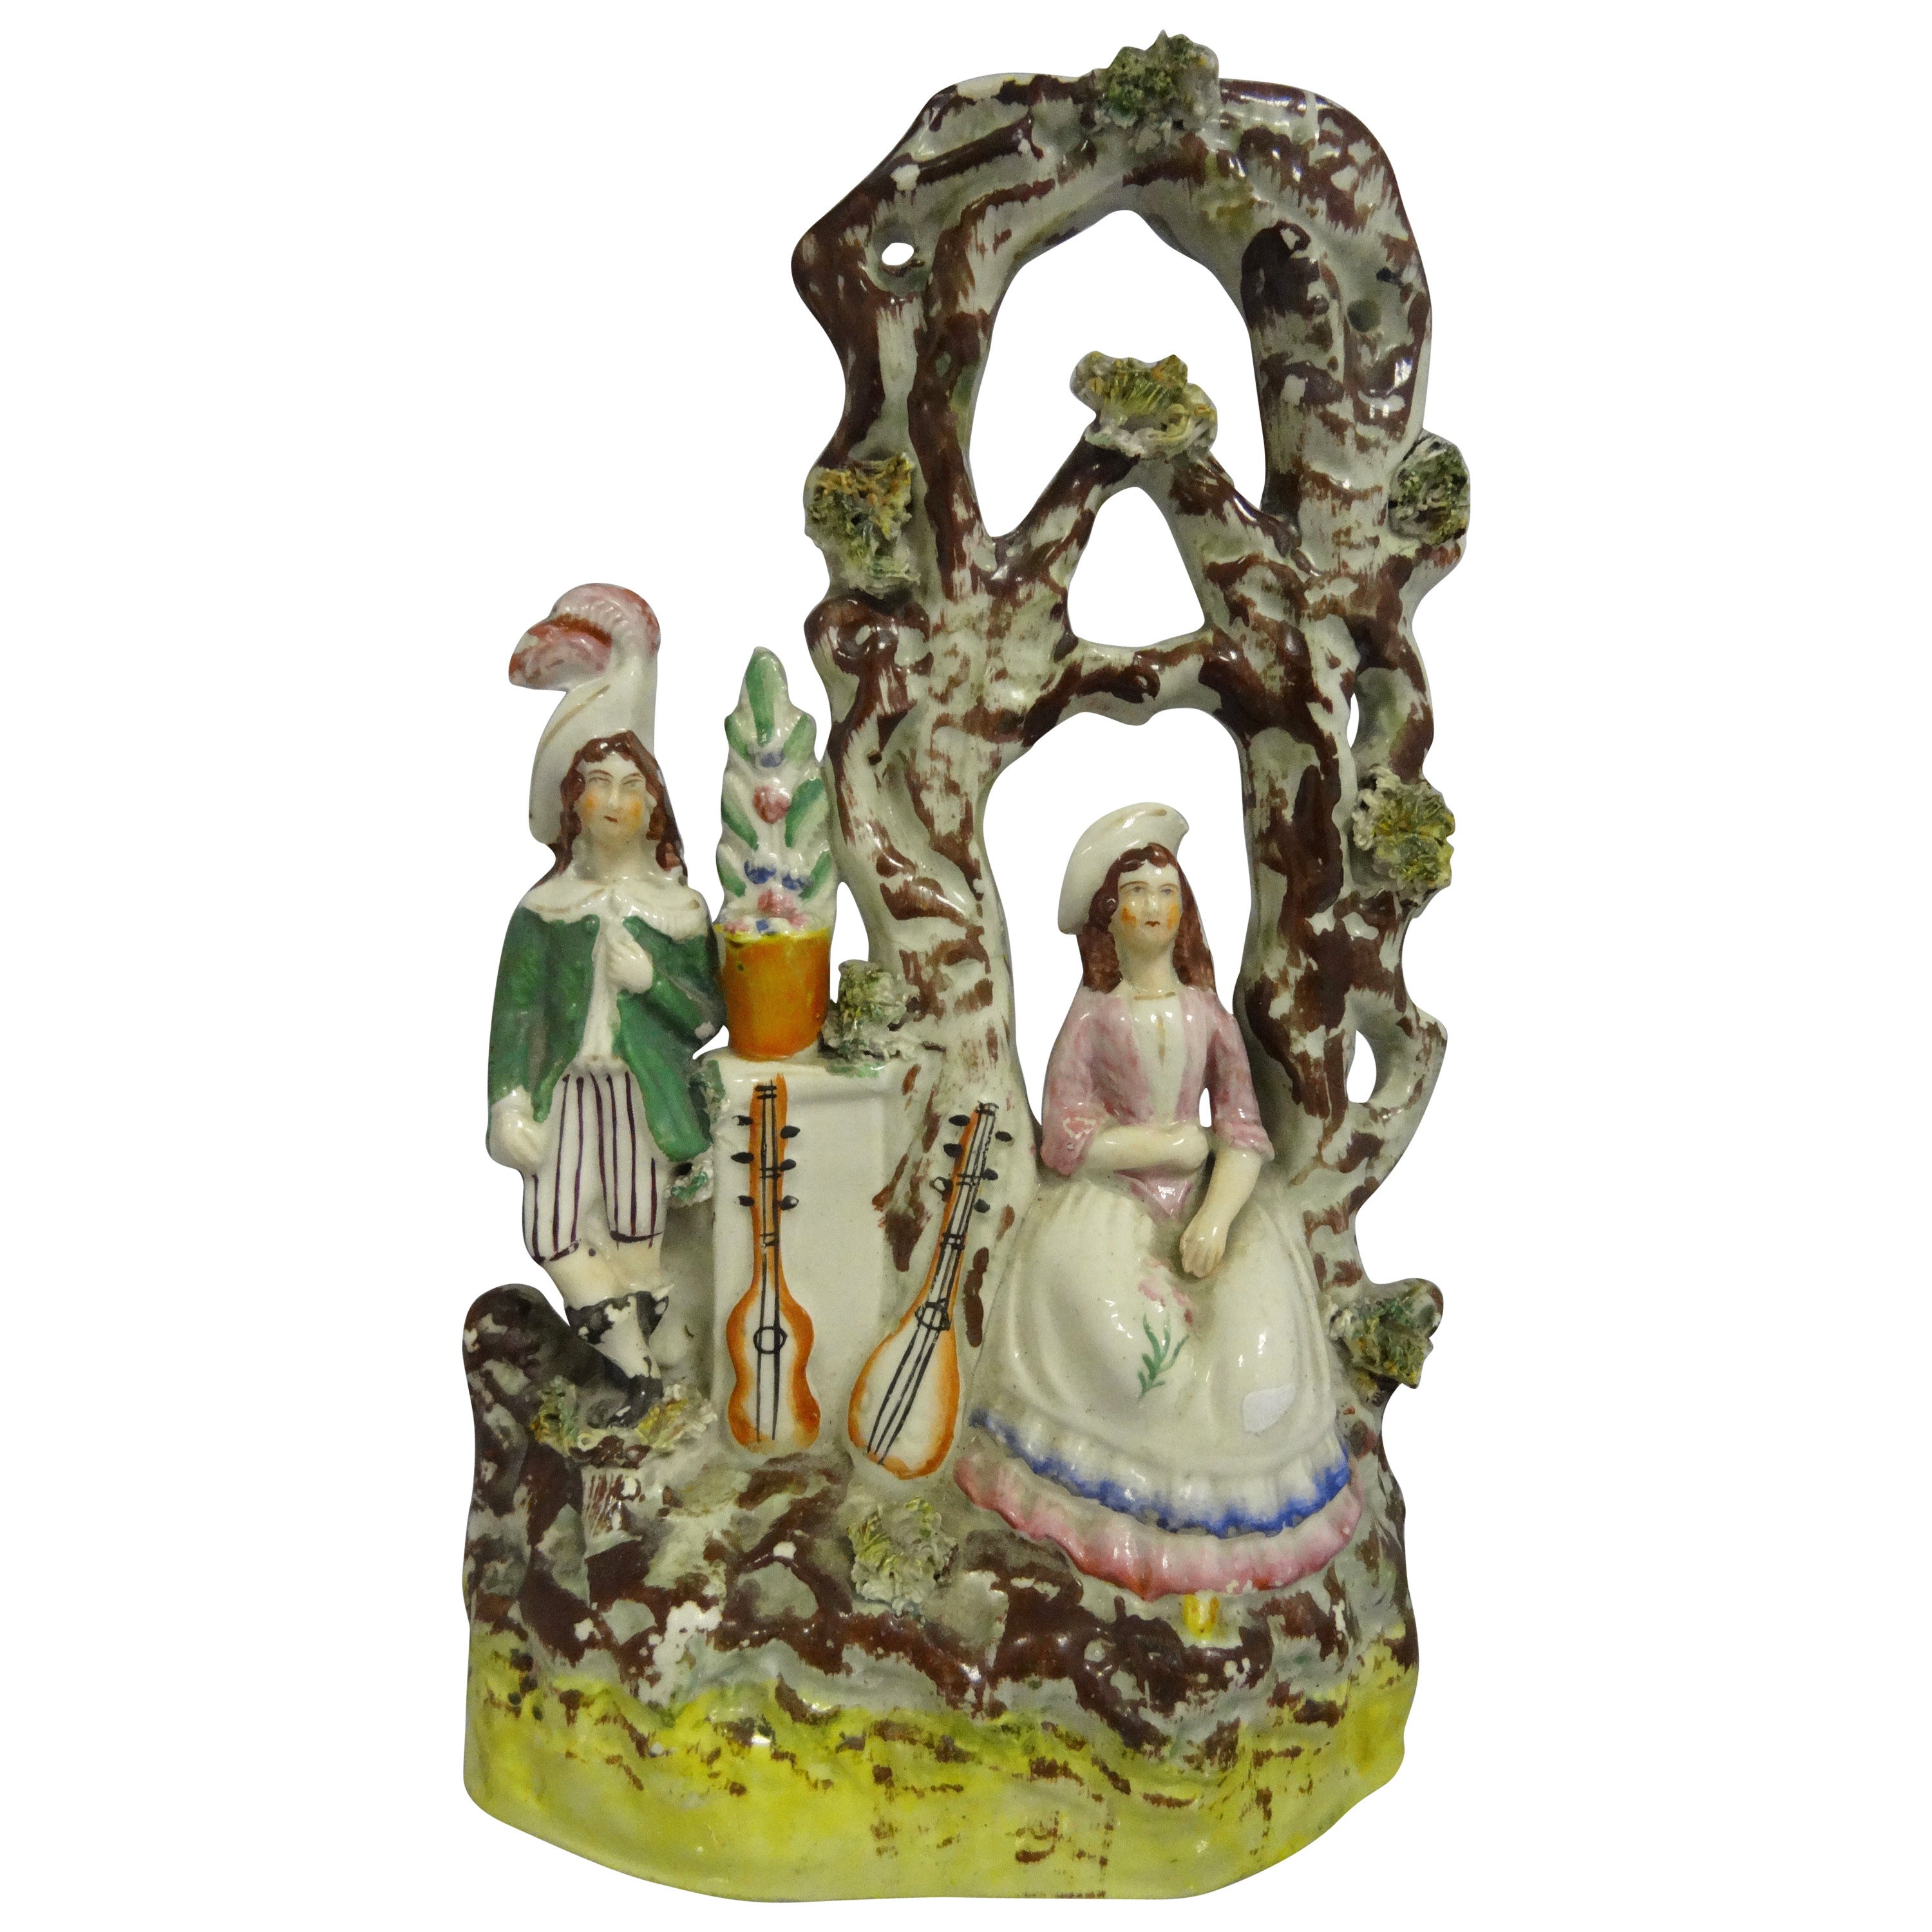 Staffordshire Flatback Composition of Two Musicians in a Bower